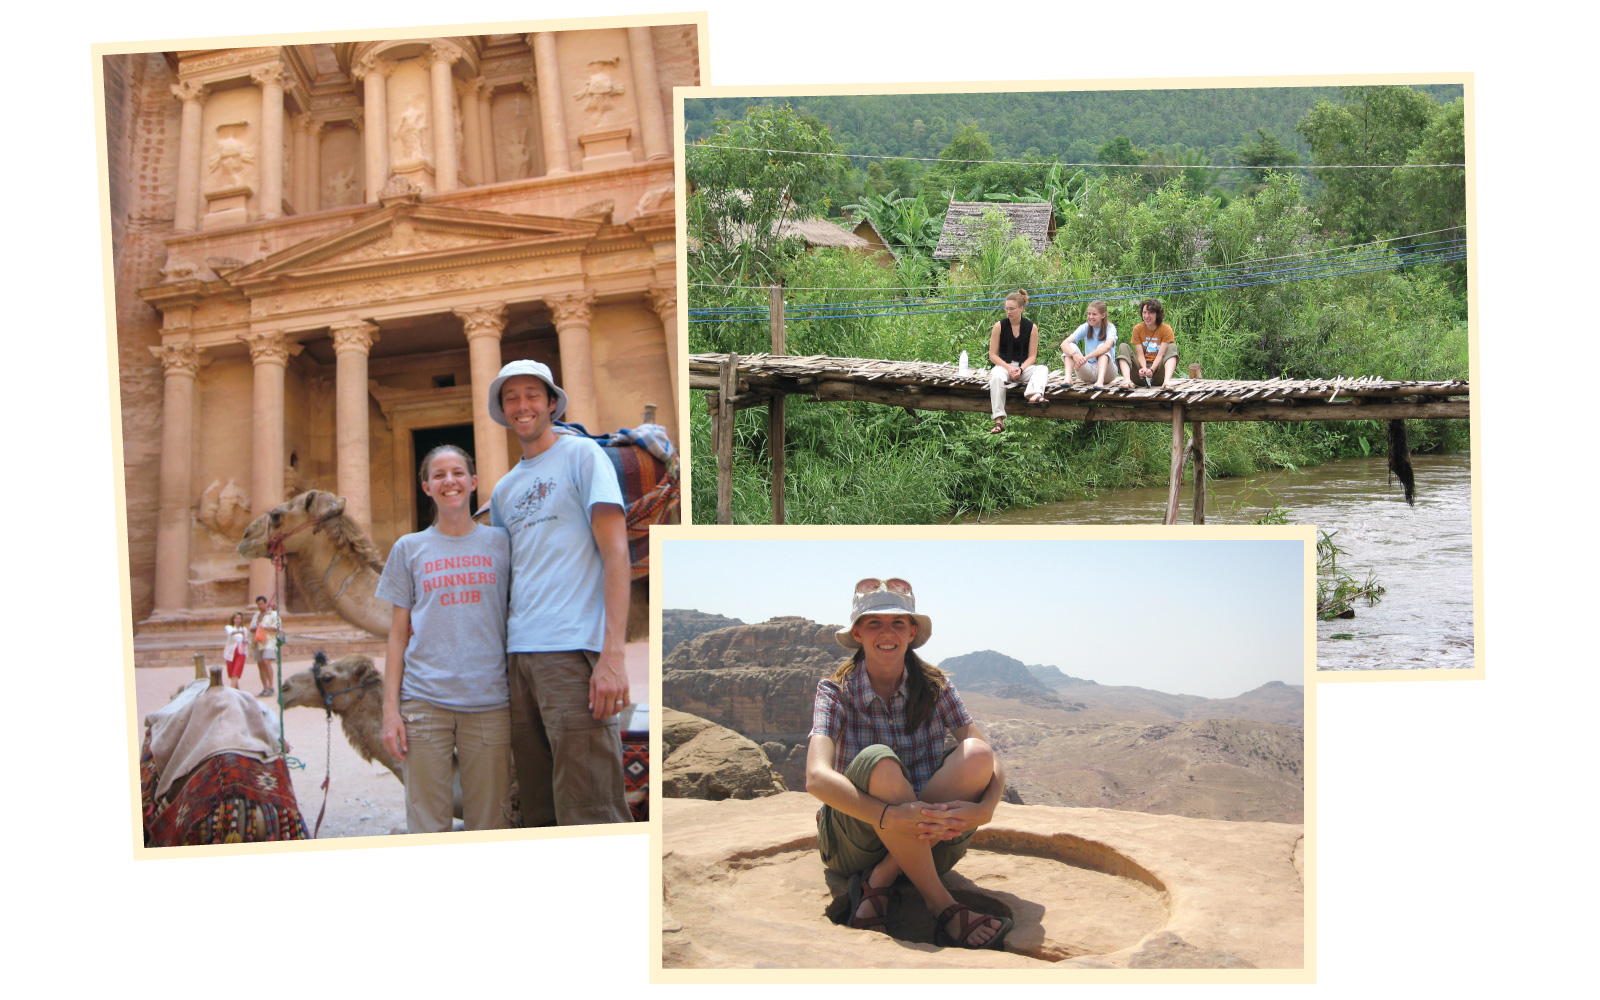 Mary Ann Bates travels during her time at ز,Ȳַ
######### and after graduation have influenced her work at J-PAL. Those travels included stops in Petra, Jordan (left, with her husband Matthew; and bottom right) and Thailand (top right).